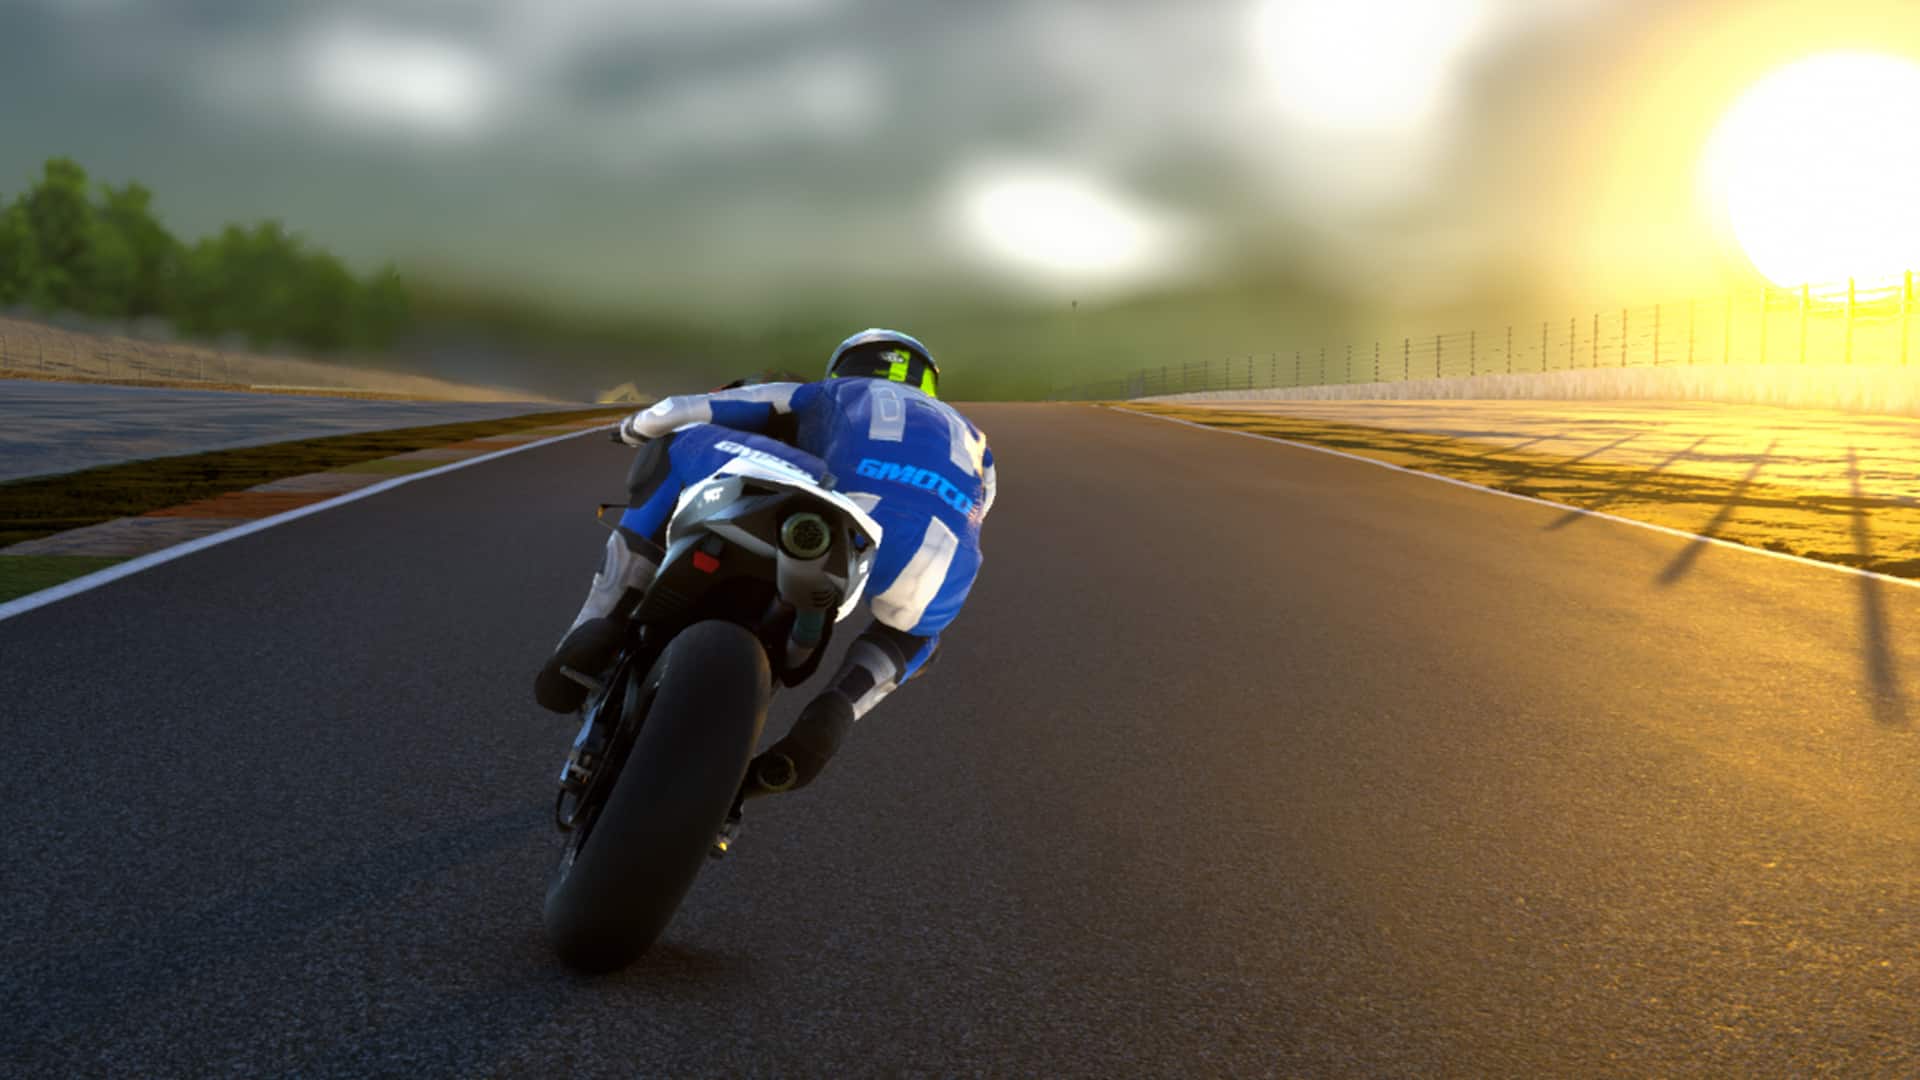 Two new tracks and Grand Prix-style motorcycle added to TrackDayR